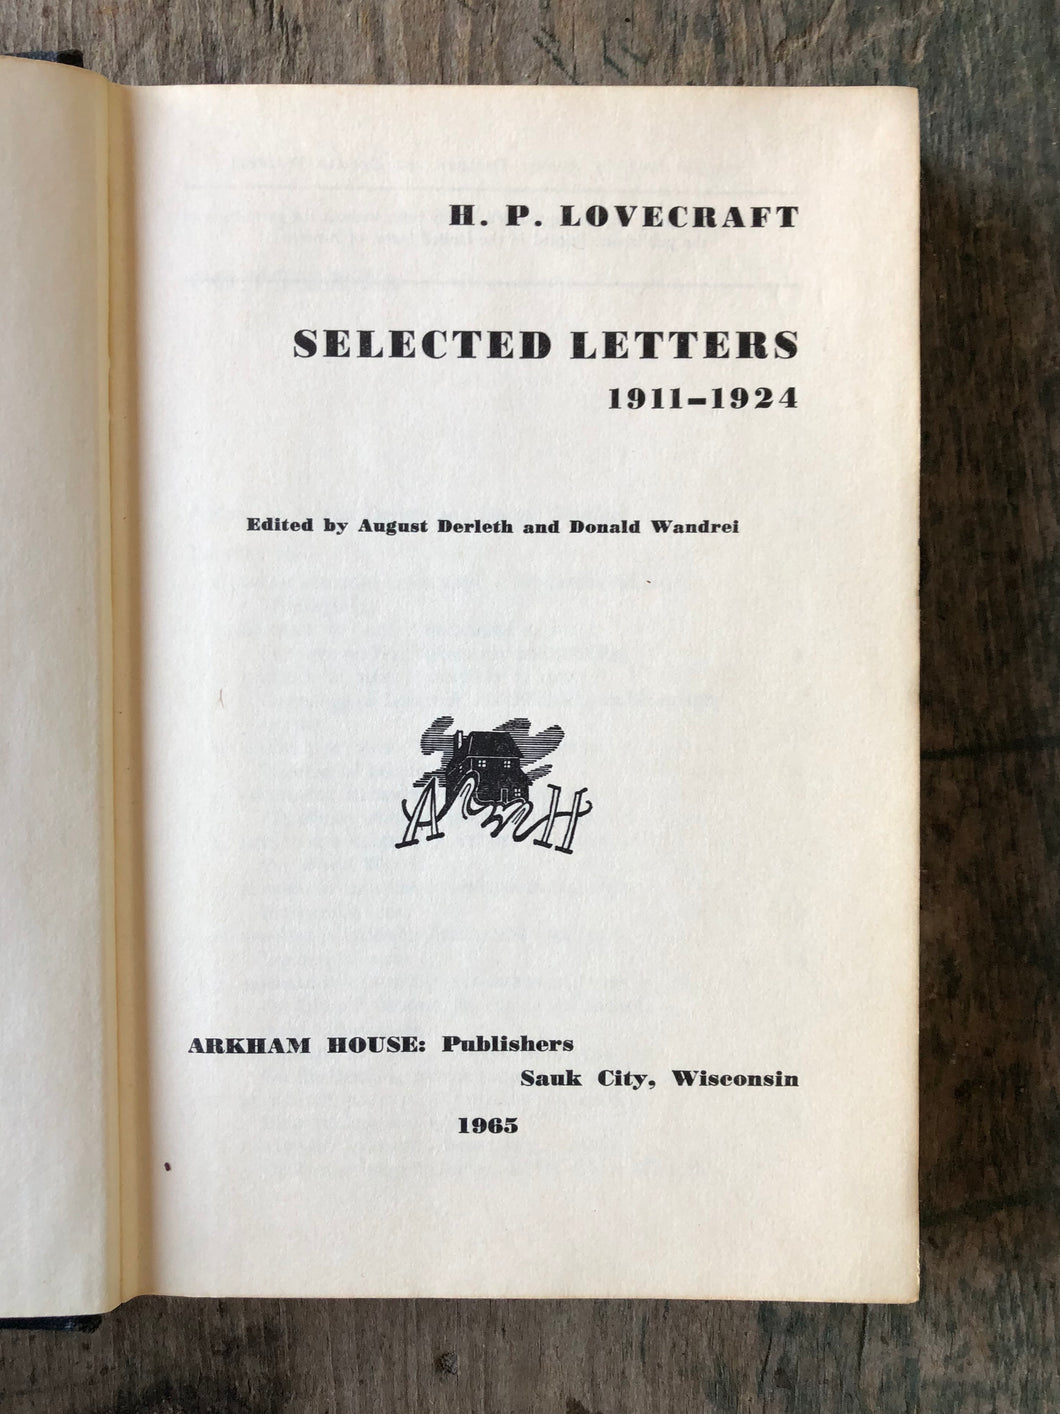 Selected Letters 1911-1924. Volume I. By H. P. Lovecraft and edited by August Derleth and Donald Wandrel